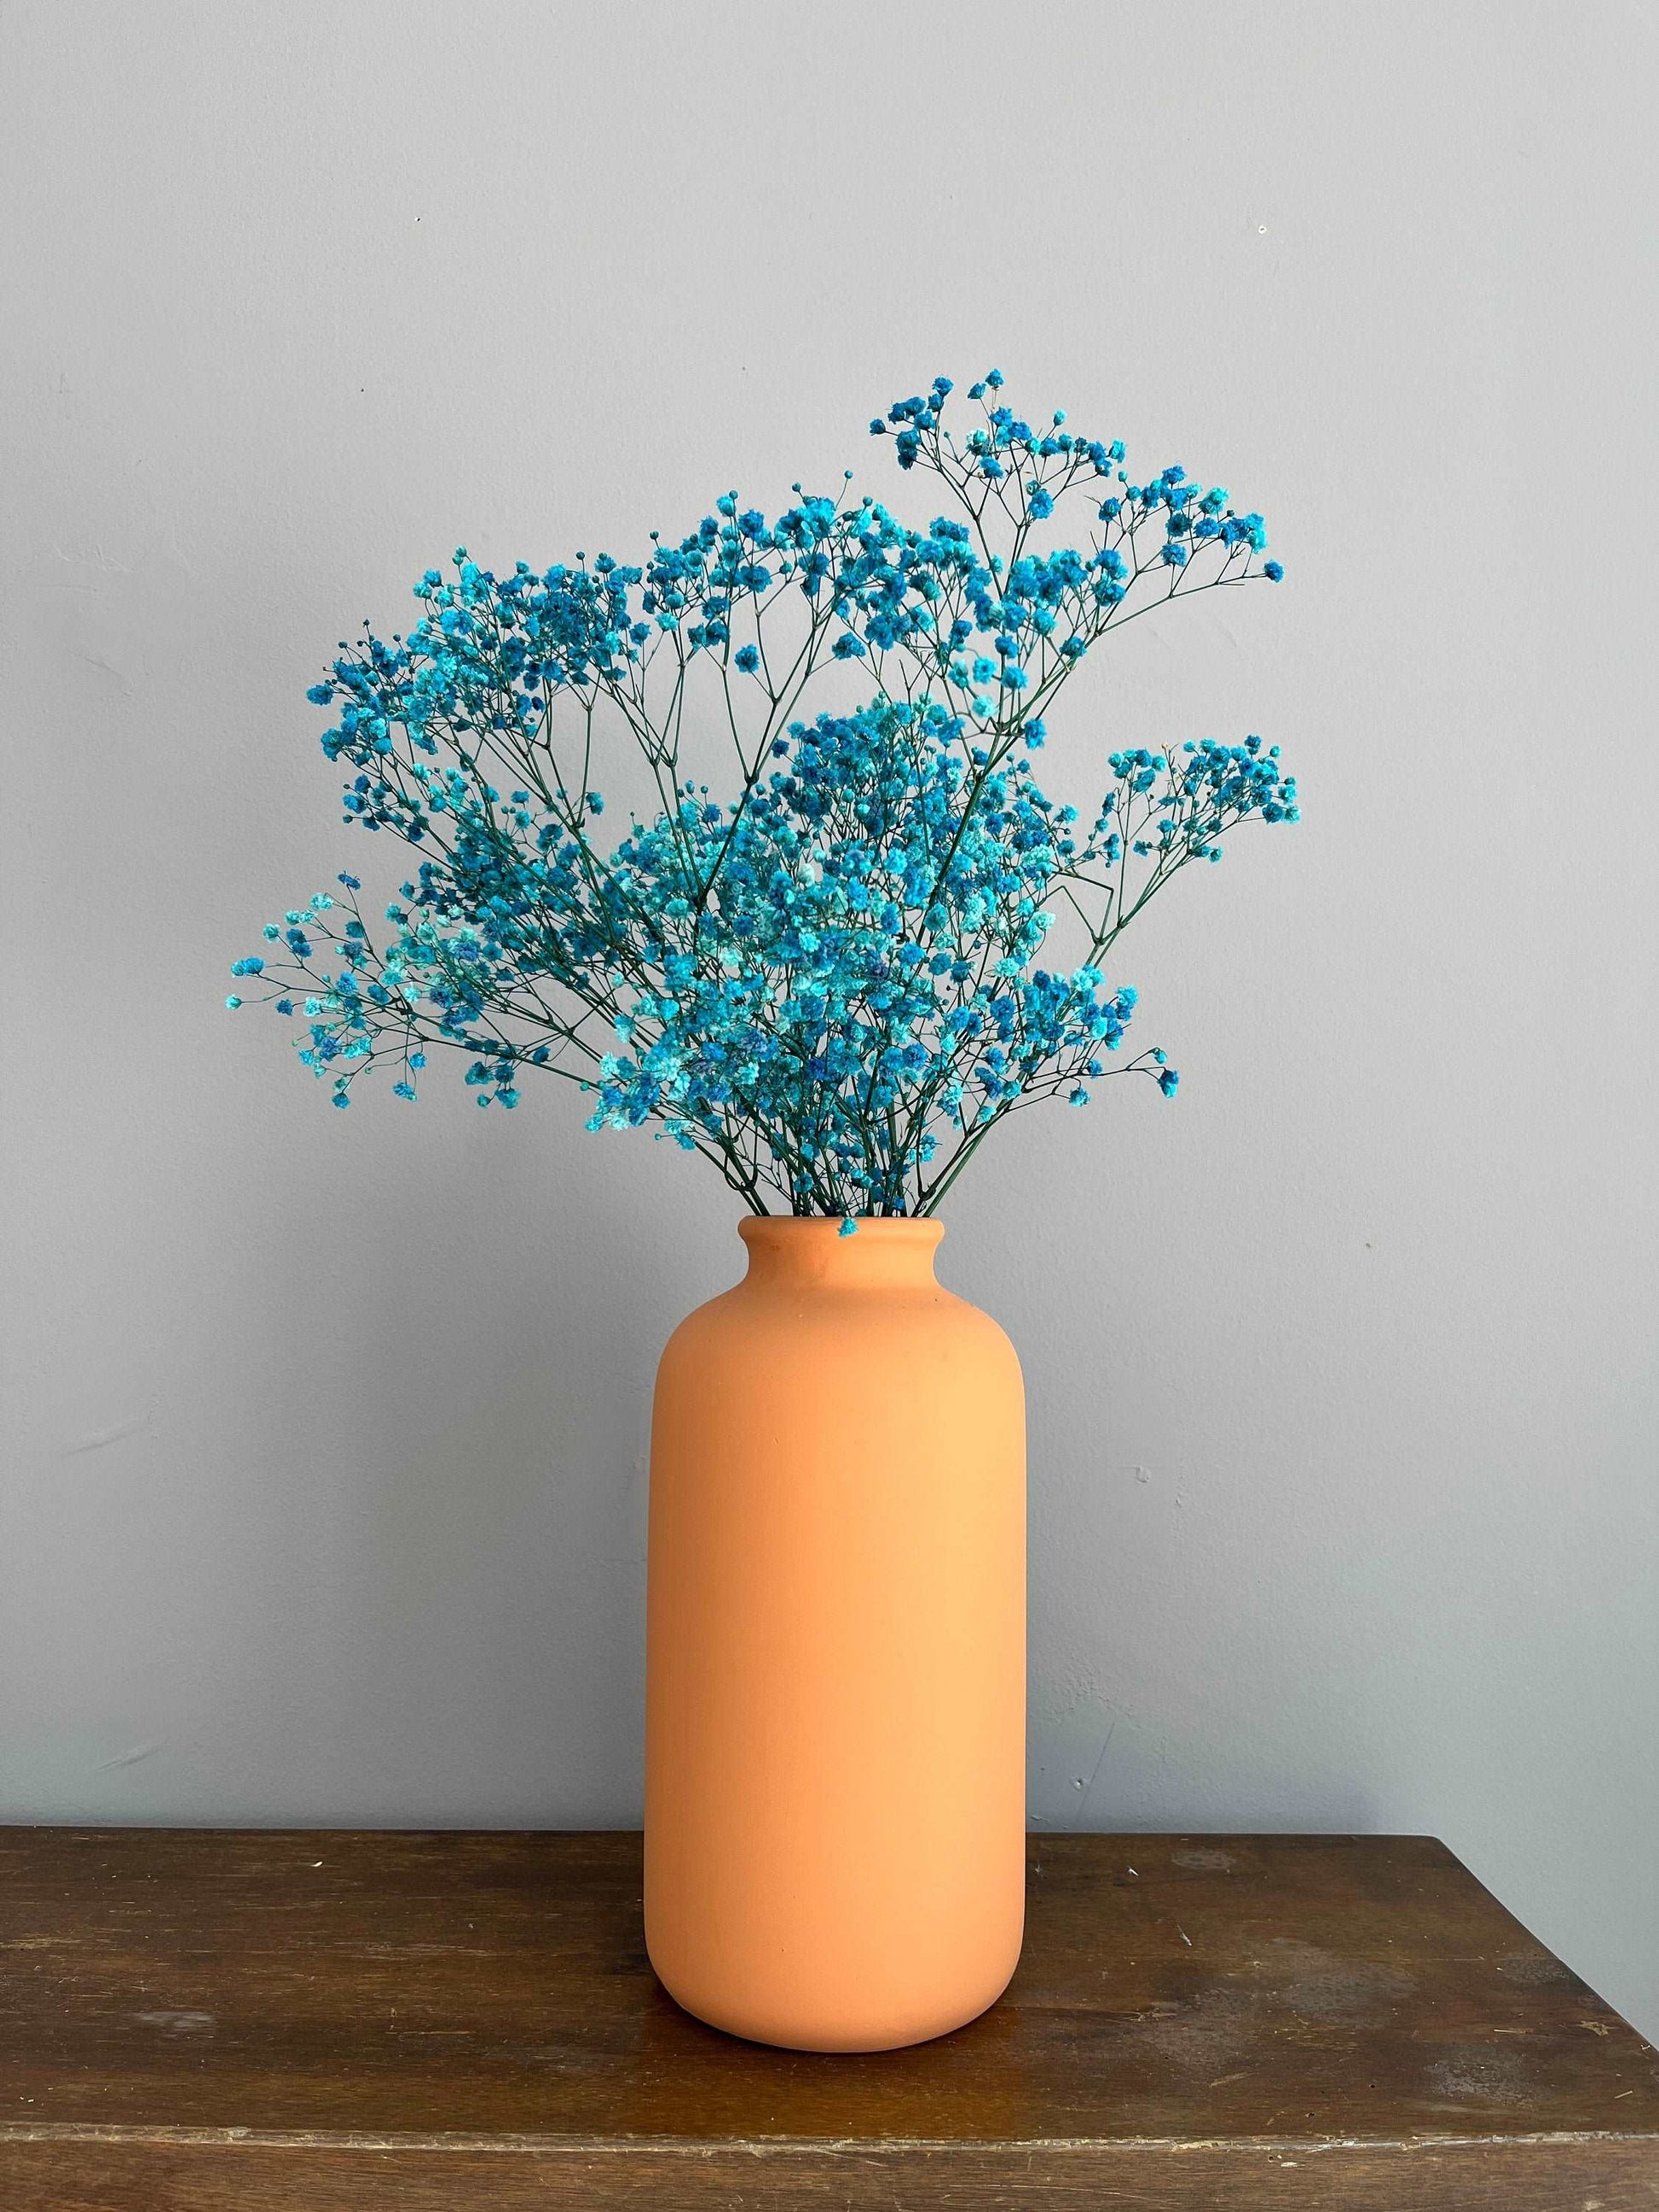 Natural Preserved Baby's Breath, Blue Gypsophila, Blue Baby's Breath, Preserved Gypsophila, Flower Arrangement, Turquoise Flowers